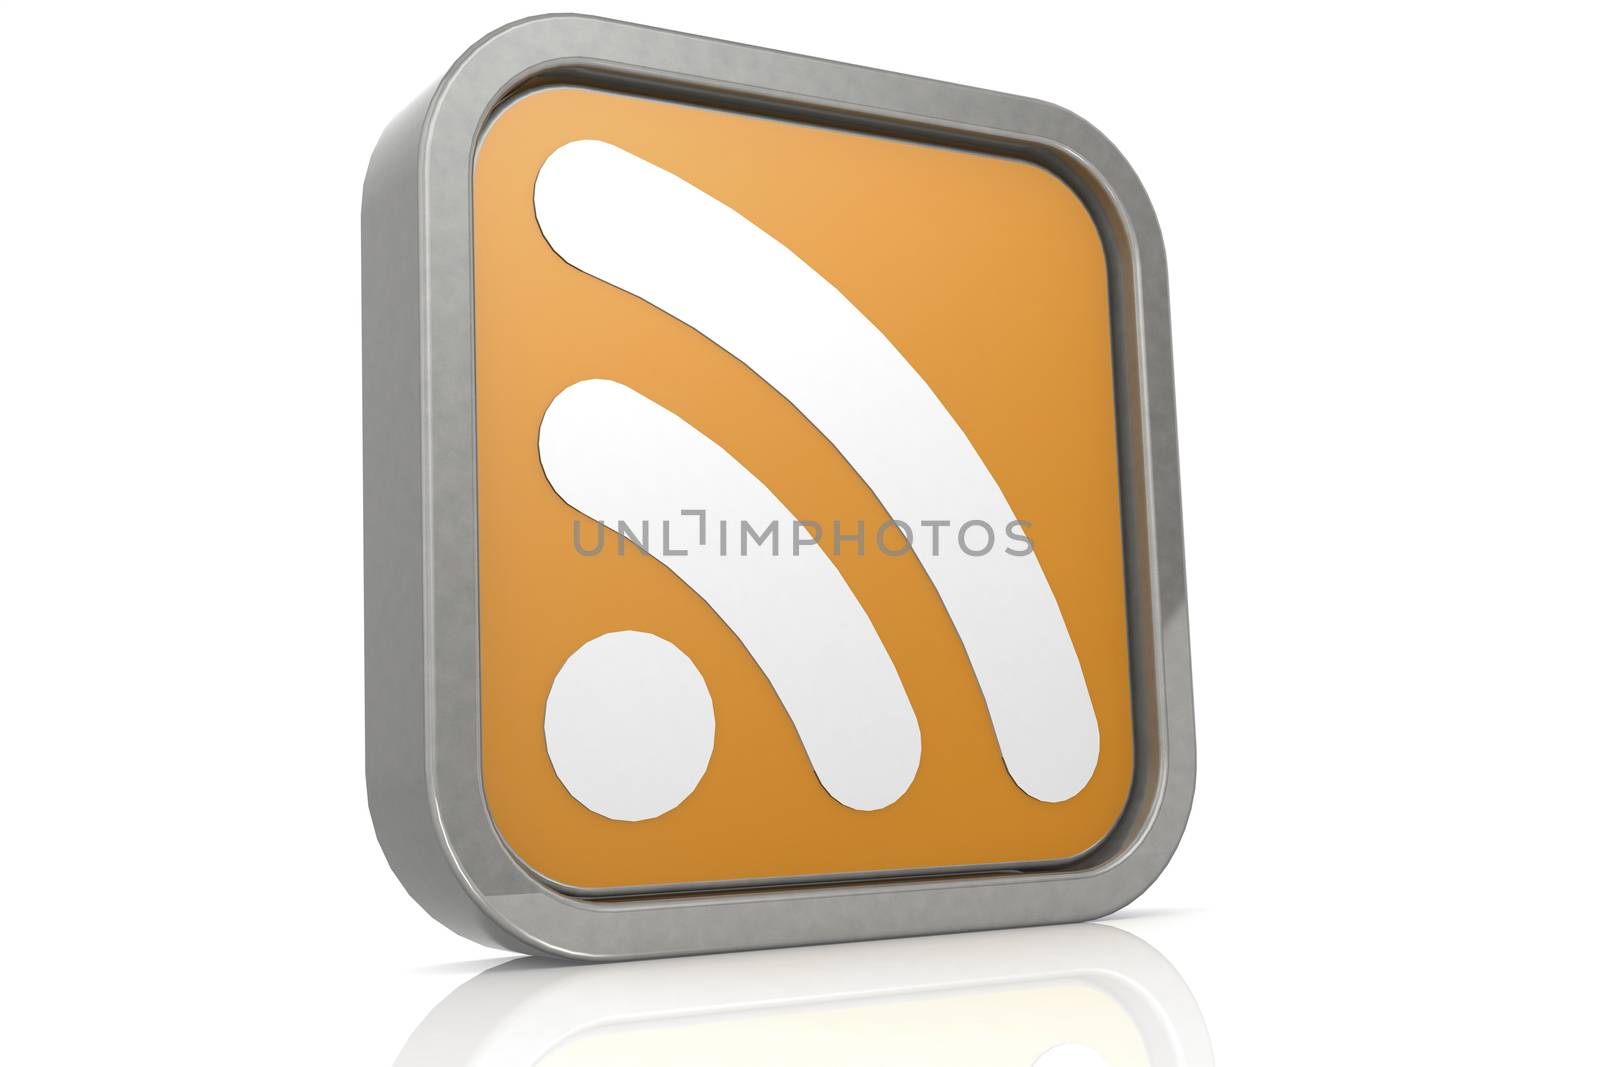 Wifi button isolated on white background, 3D rendering